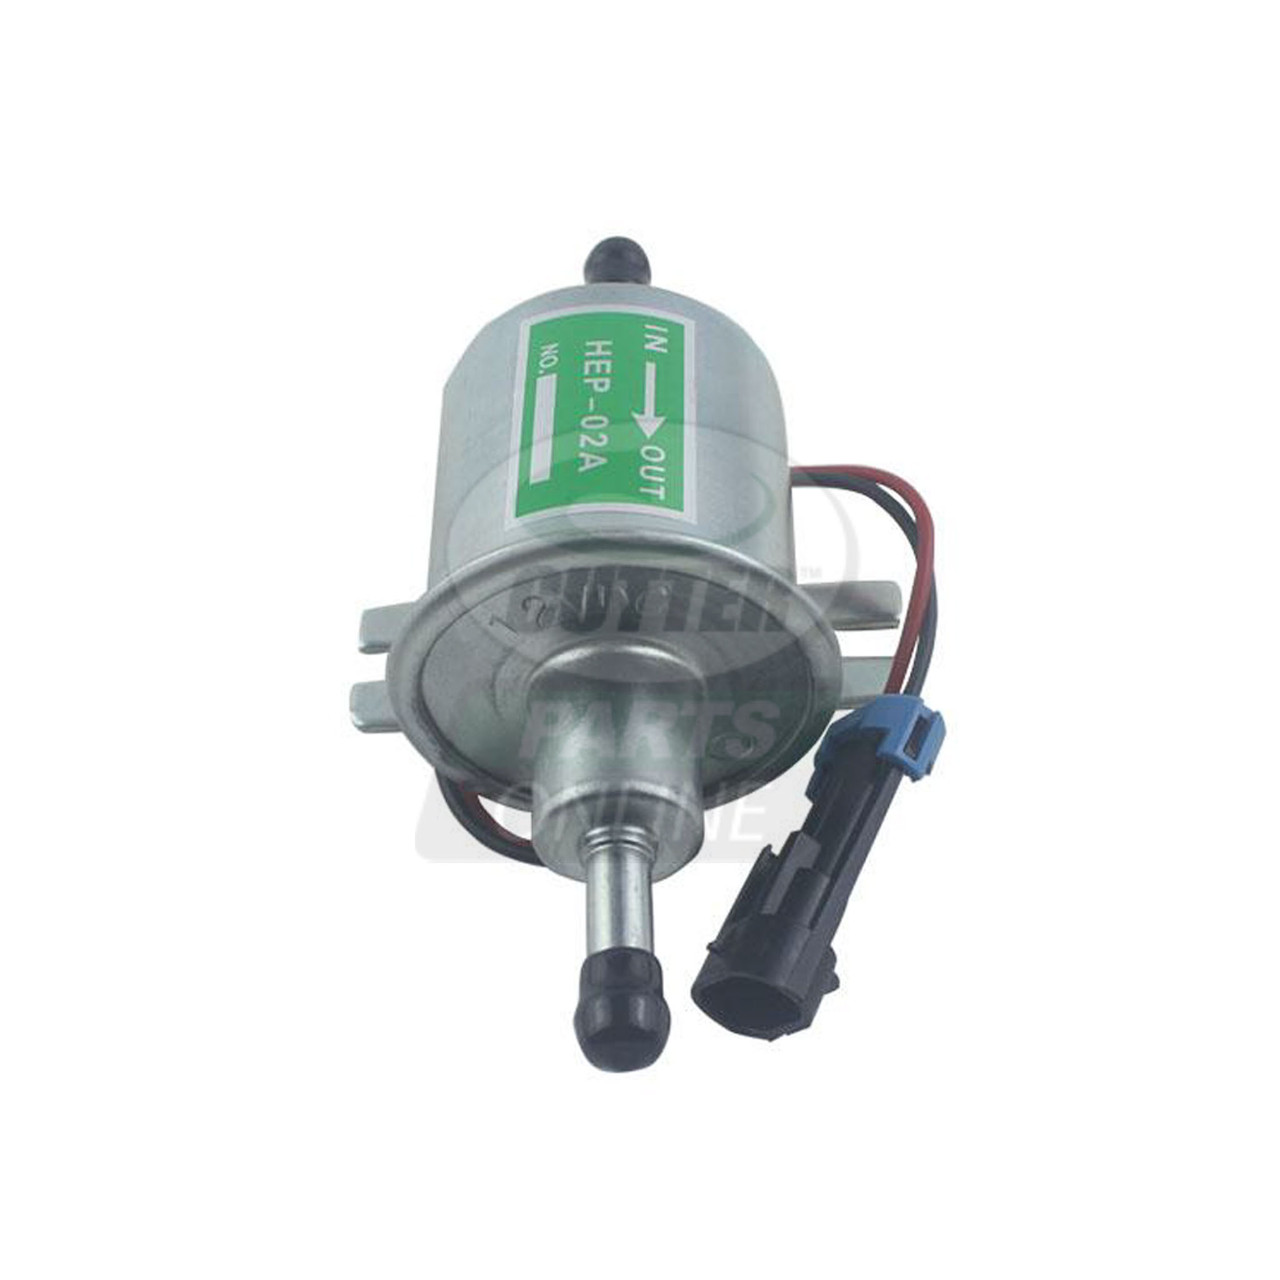 New Fuel Pump and Filter Assembly - Replaces Toro 110-8806